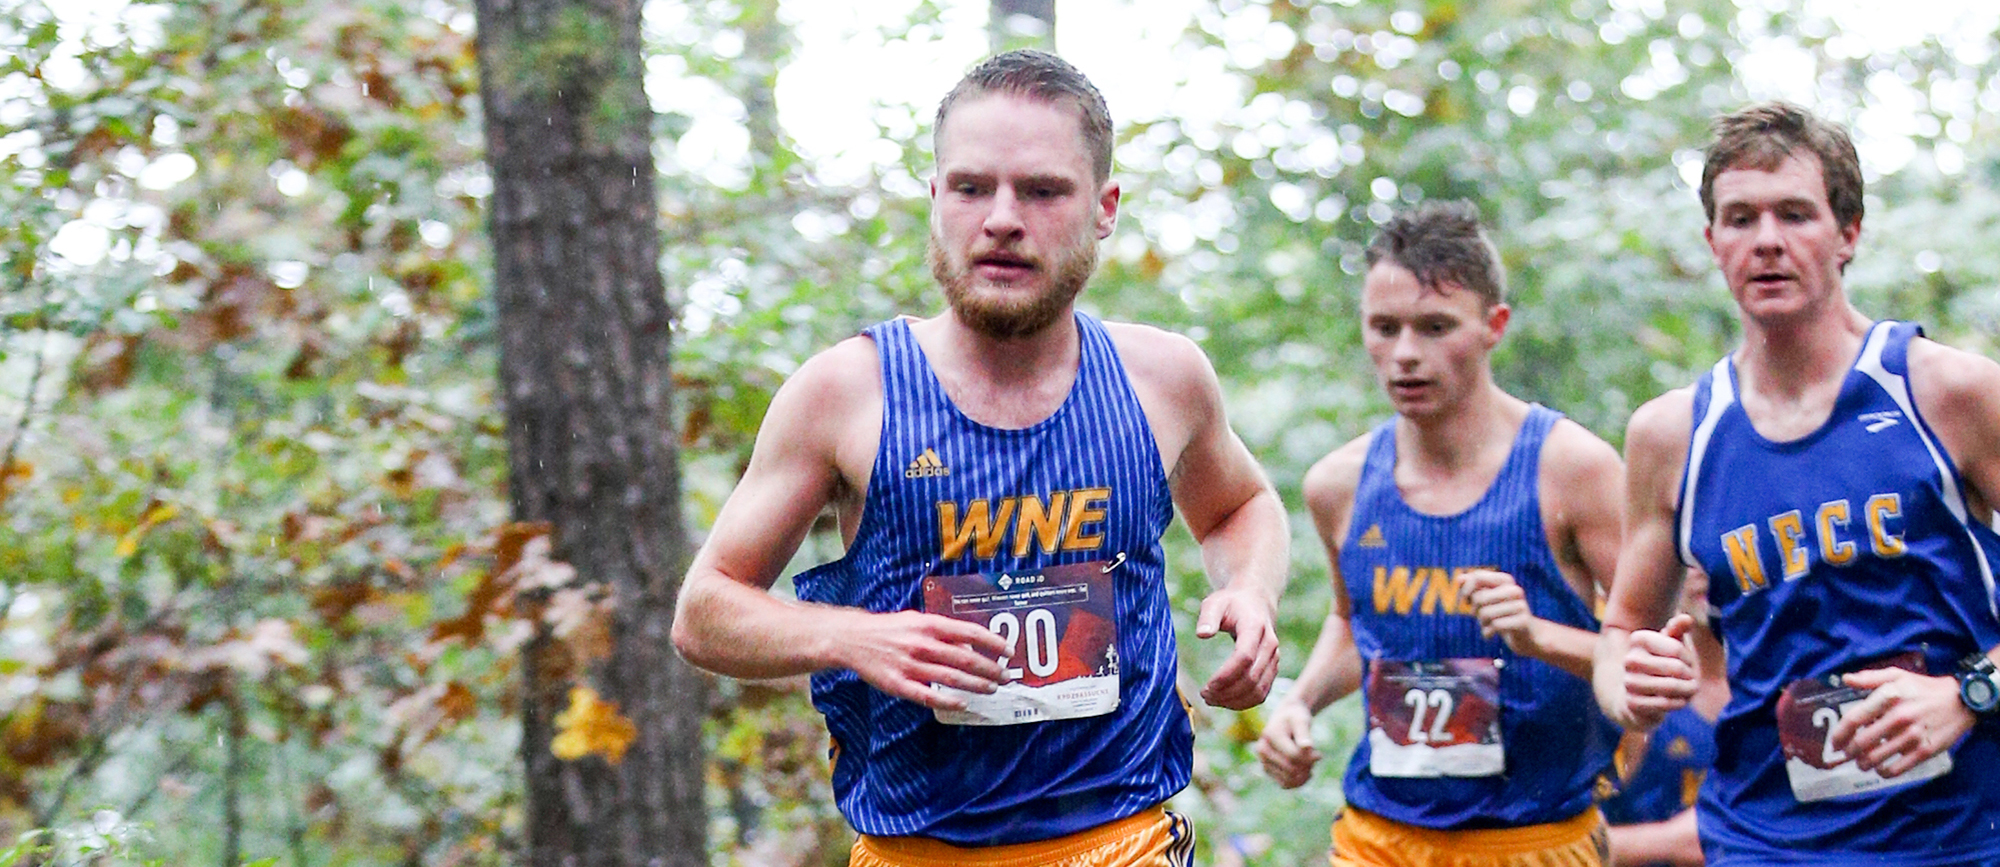 Jacob Eberli finished 164th with a time of 29:38.96 on Saturday at the UMass Dartmouth Invitational. (Photo by Chris Marion)